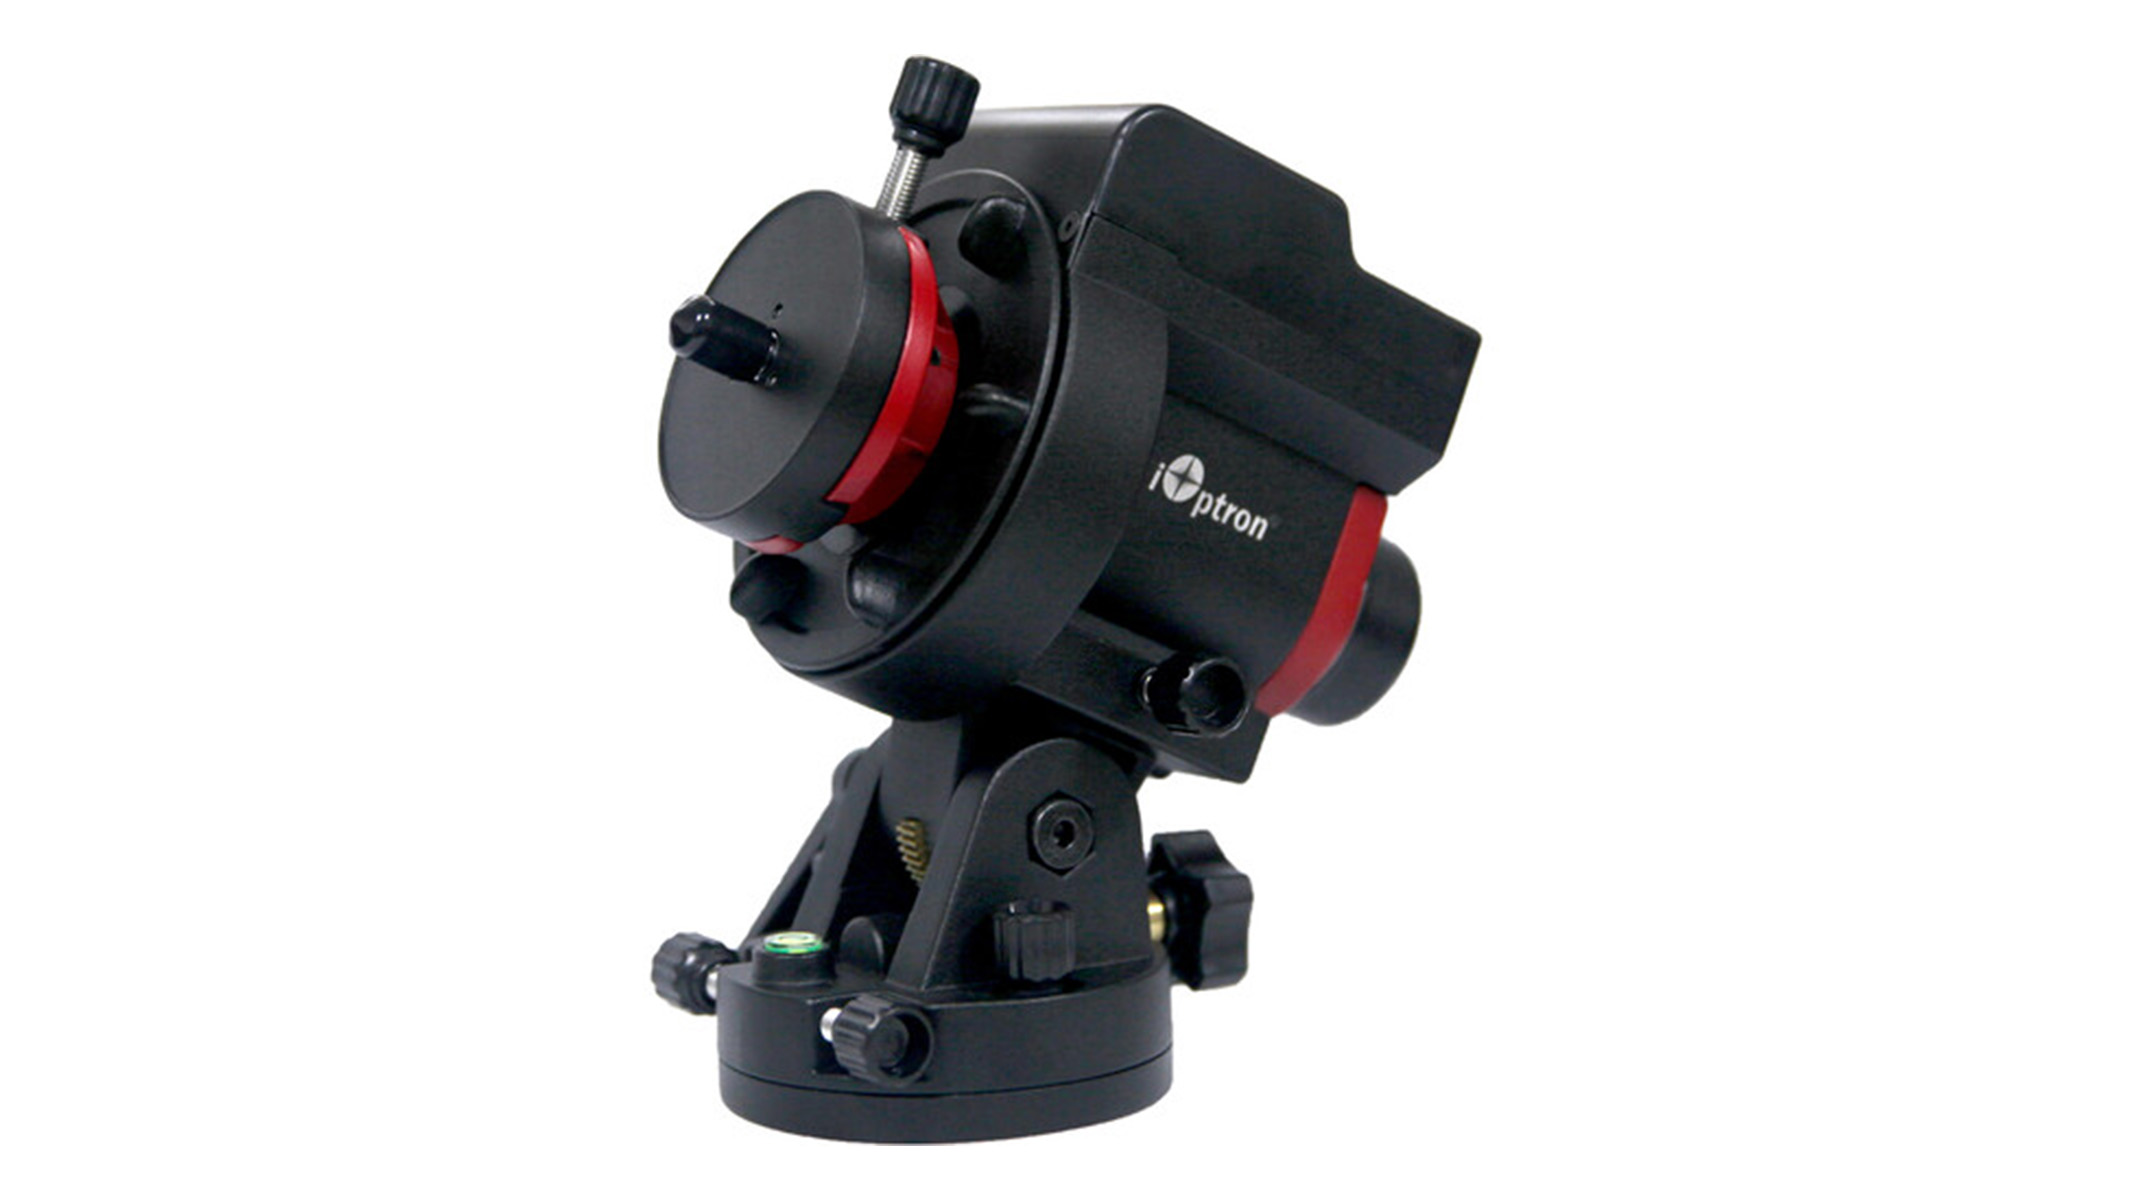 A product photo of the iOptron SkyGuider Pro